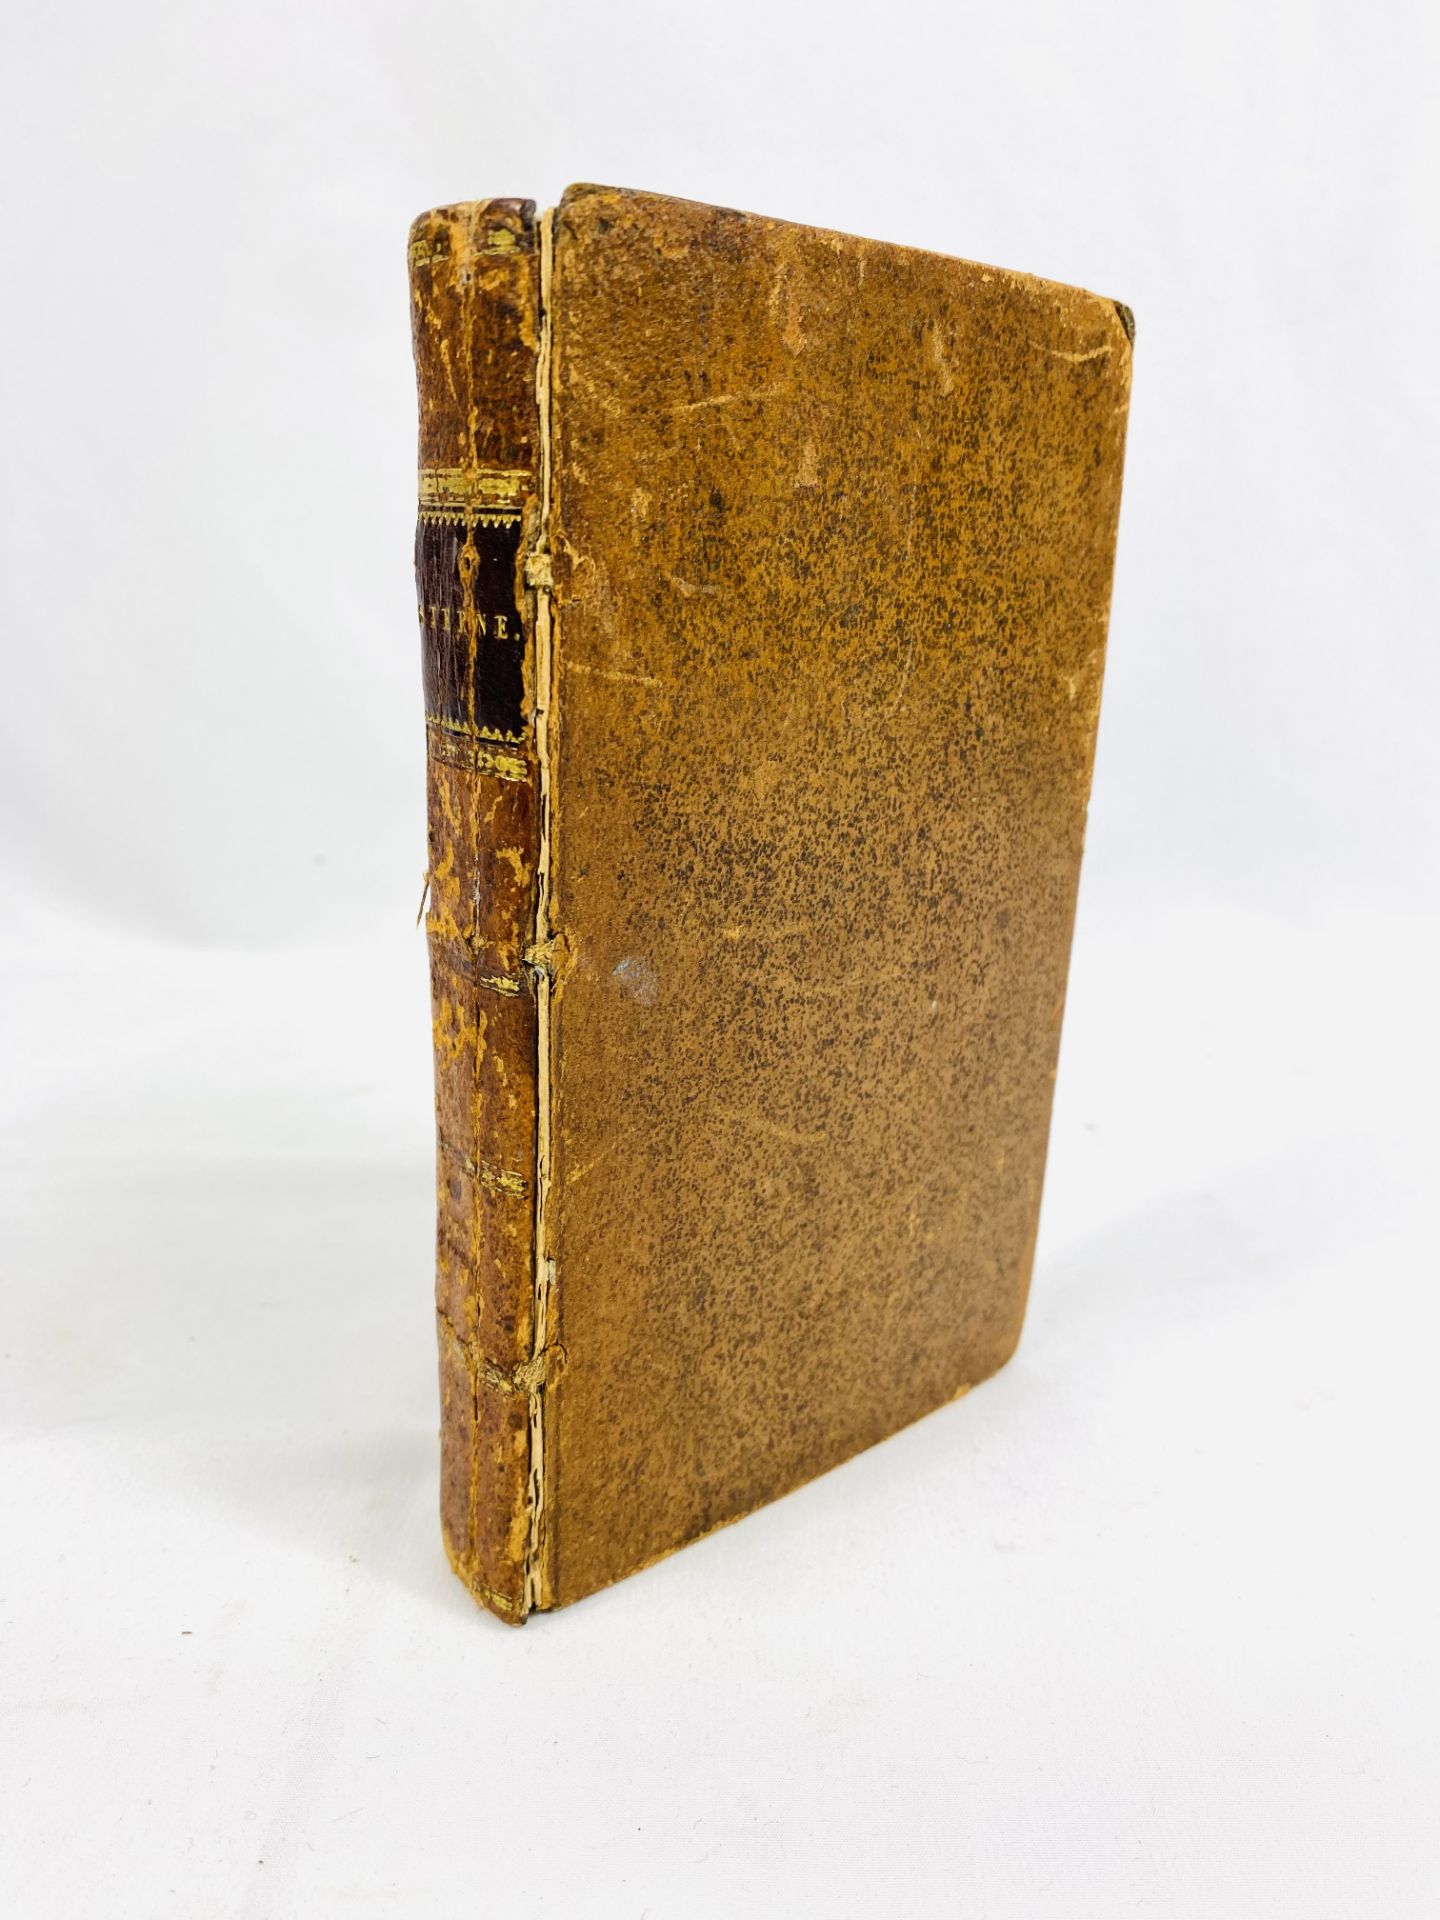 The Beauties of Sterne, leather bound, printed London 1799